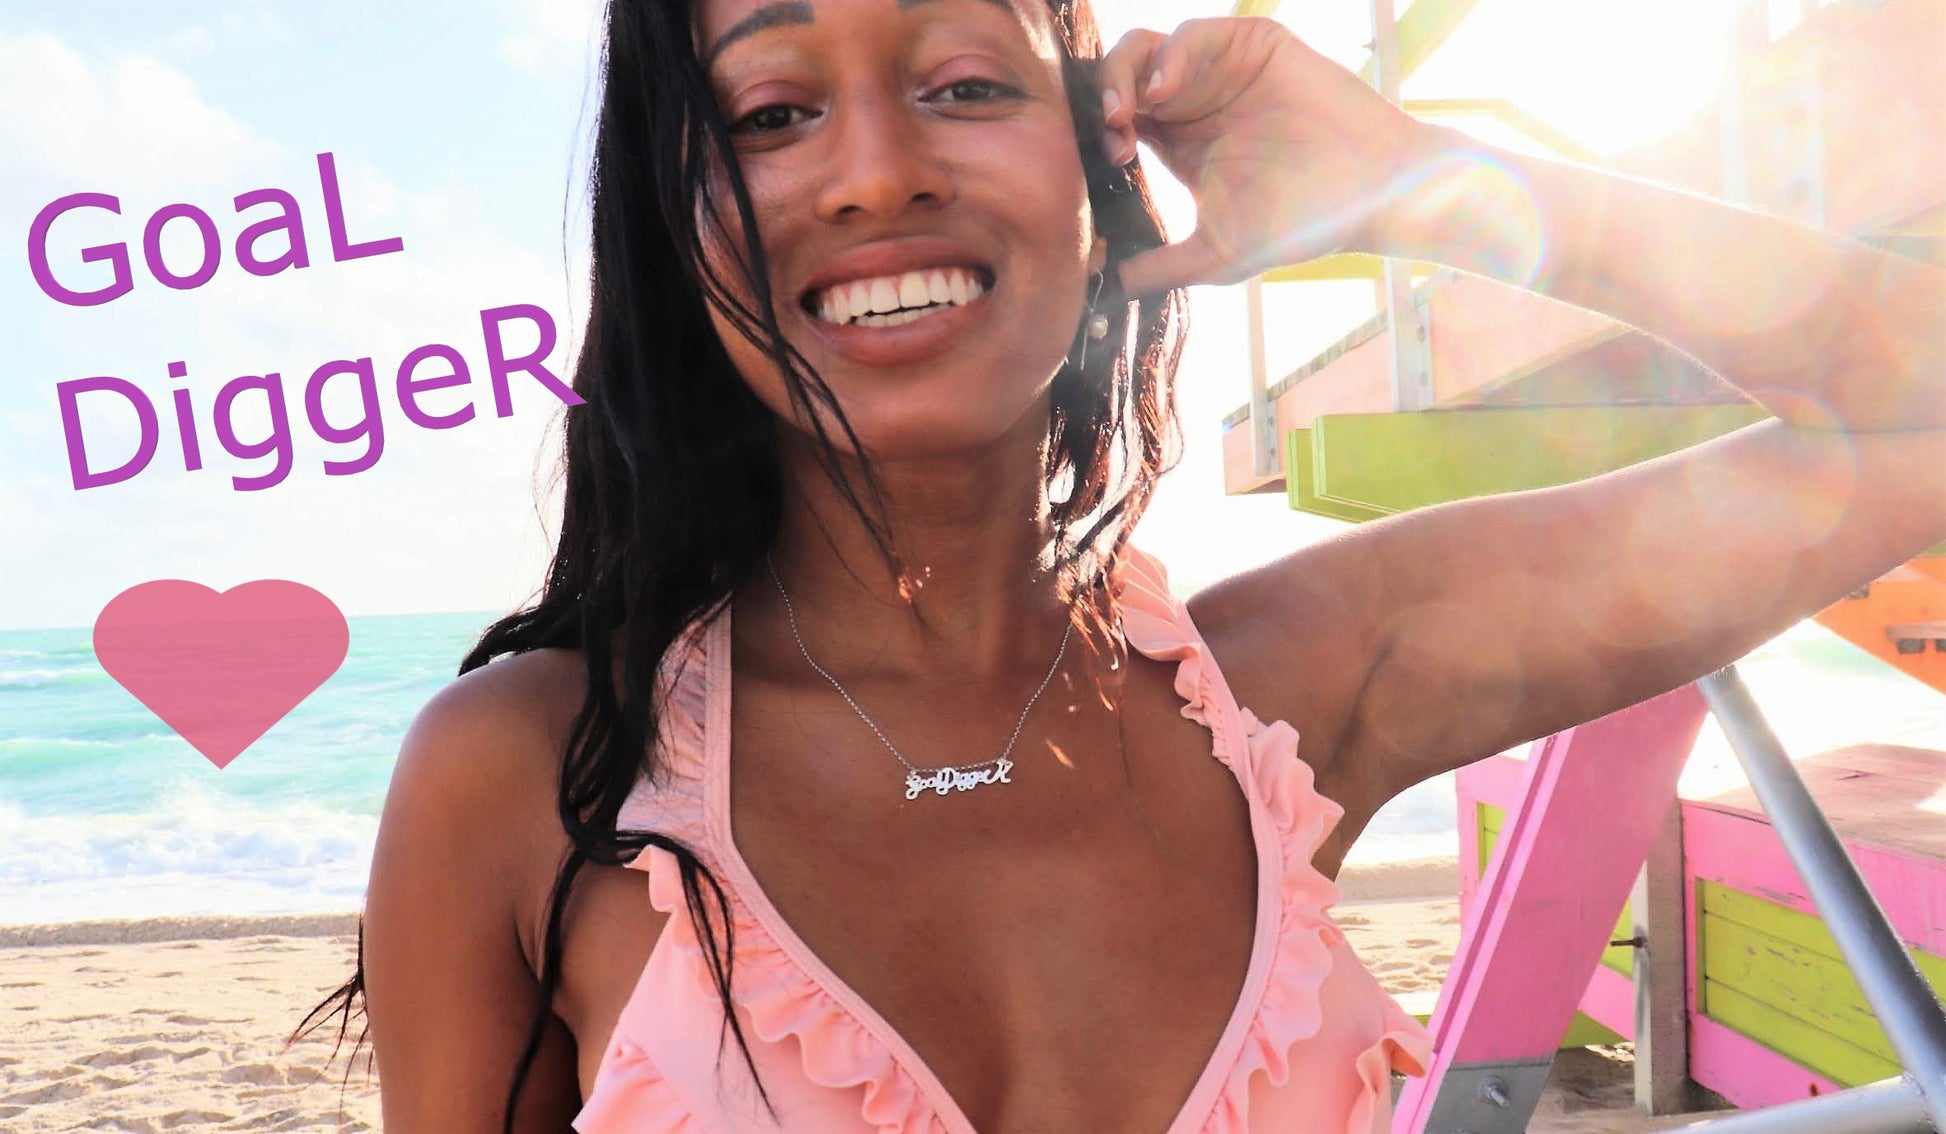 black woman on beach in pink bikini in front of a lifeguard stand wearing goaldigger necklace